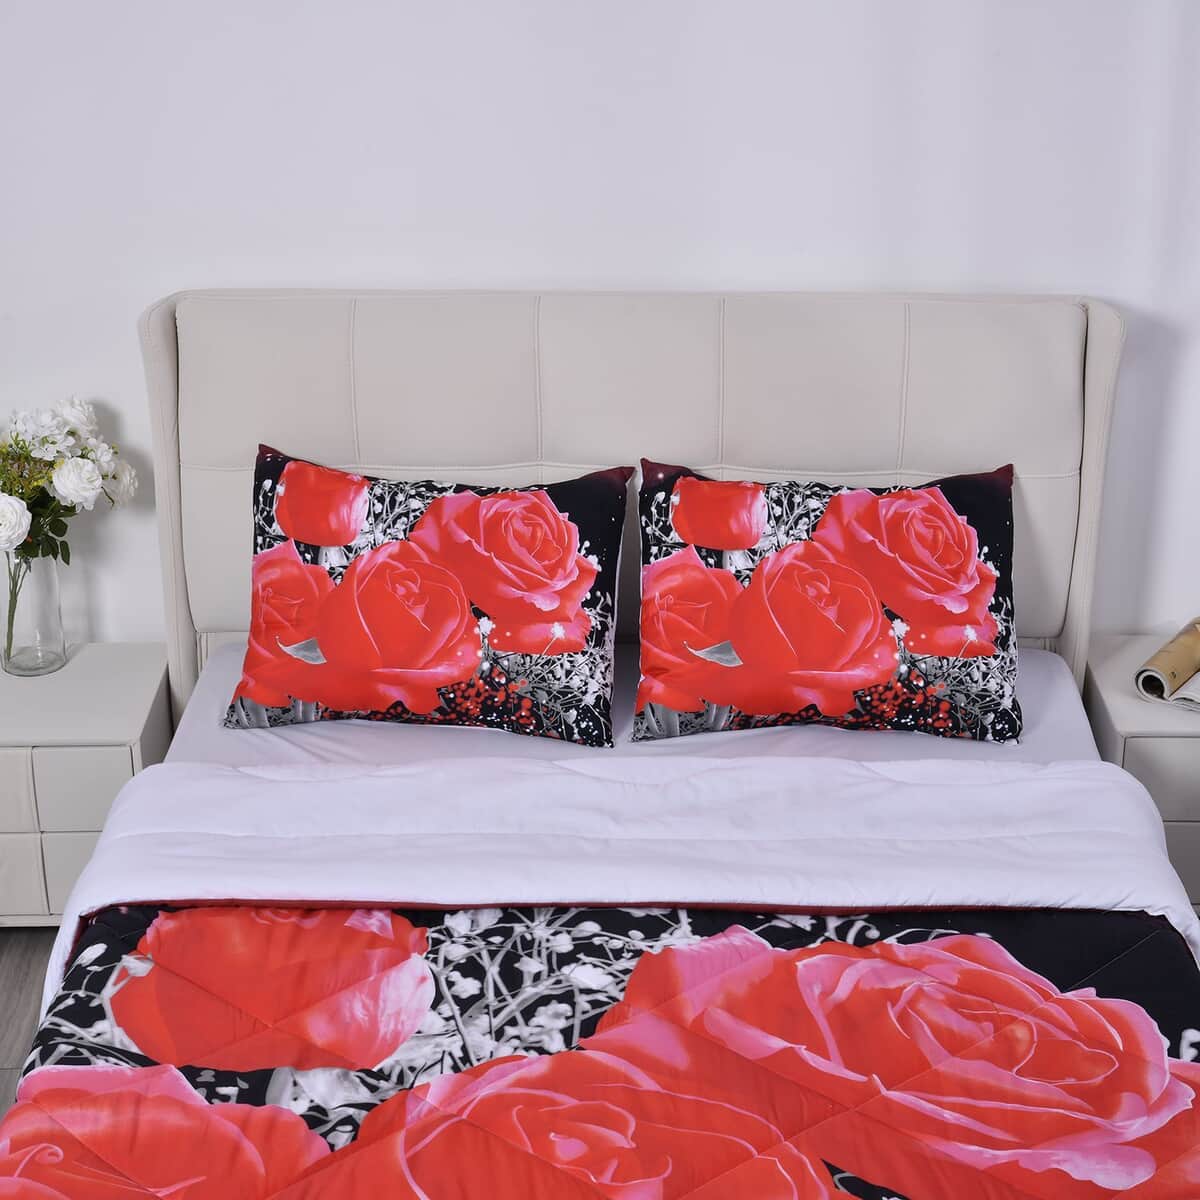 Homesmart Red Floral 3D Digital Print Pattern Microfiber Comforter and Pillow Cover - Queen, Best Comforter Sets, Bed Comforters, Comforter Set for Bedroom image number 3